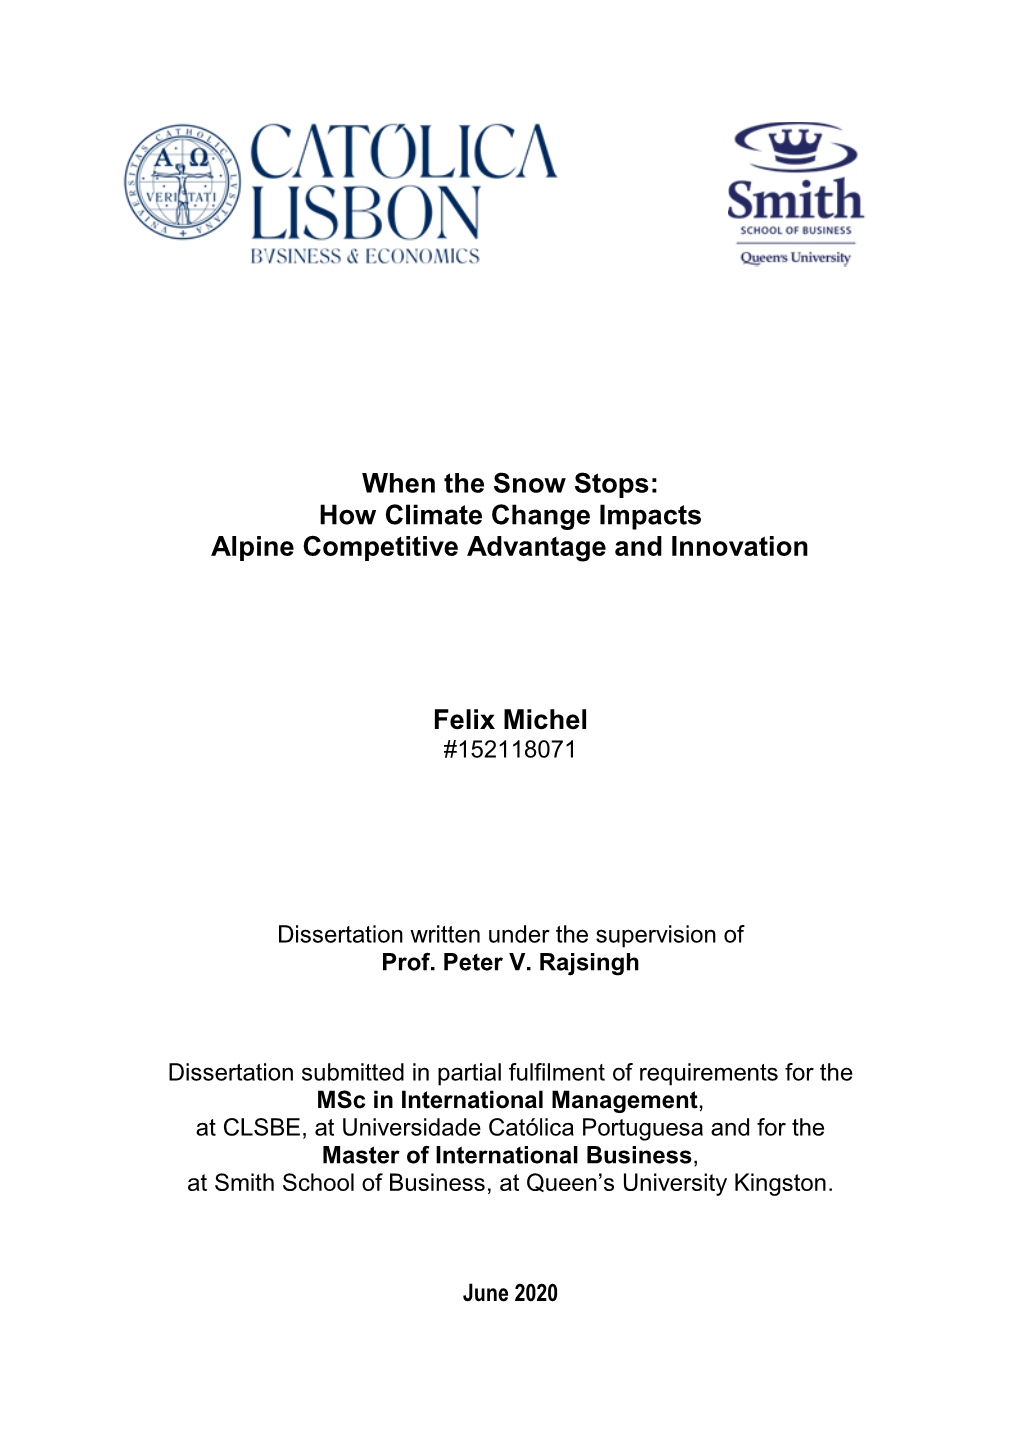 When the Snow Stops: How Climate Change Impacts Alpine Competitive Advantage and Innovation